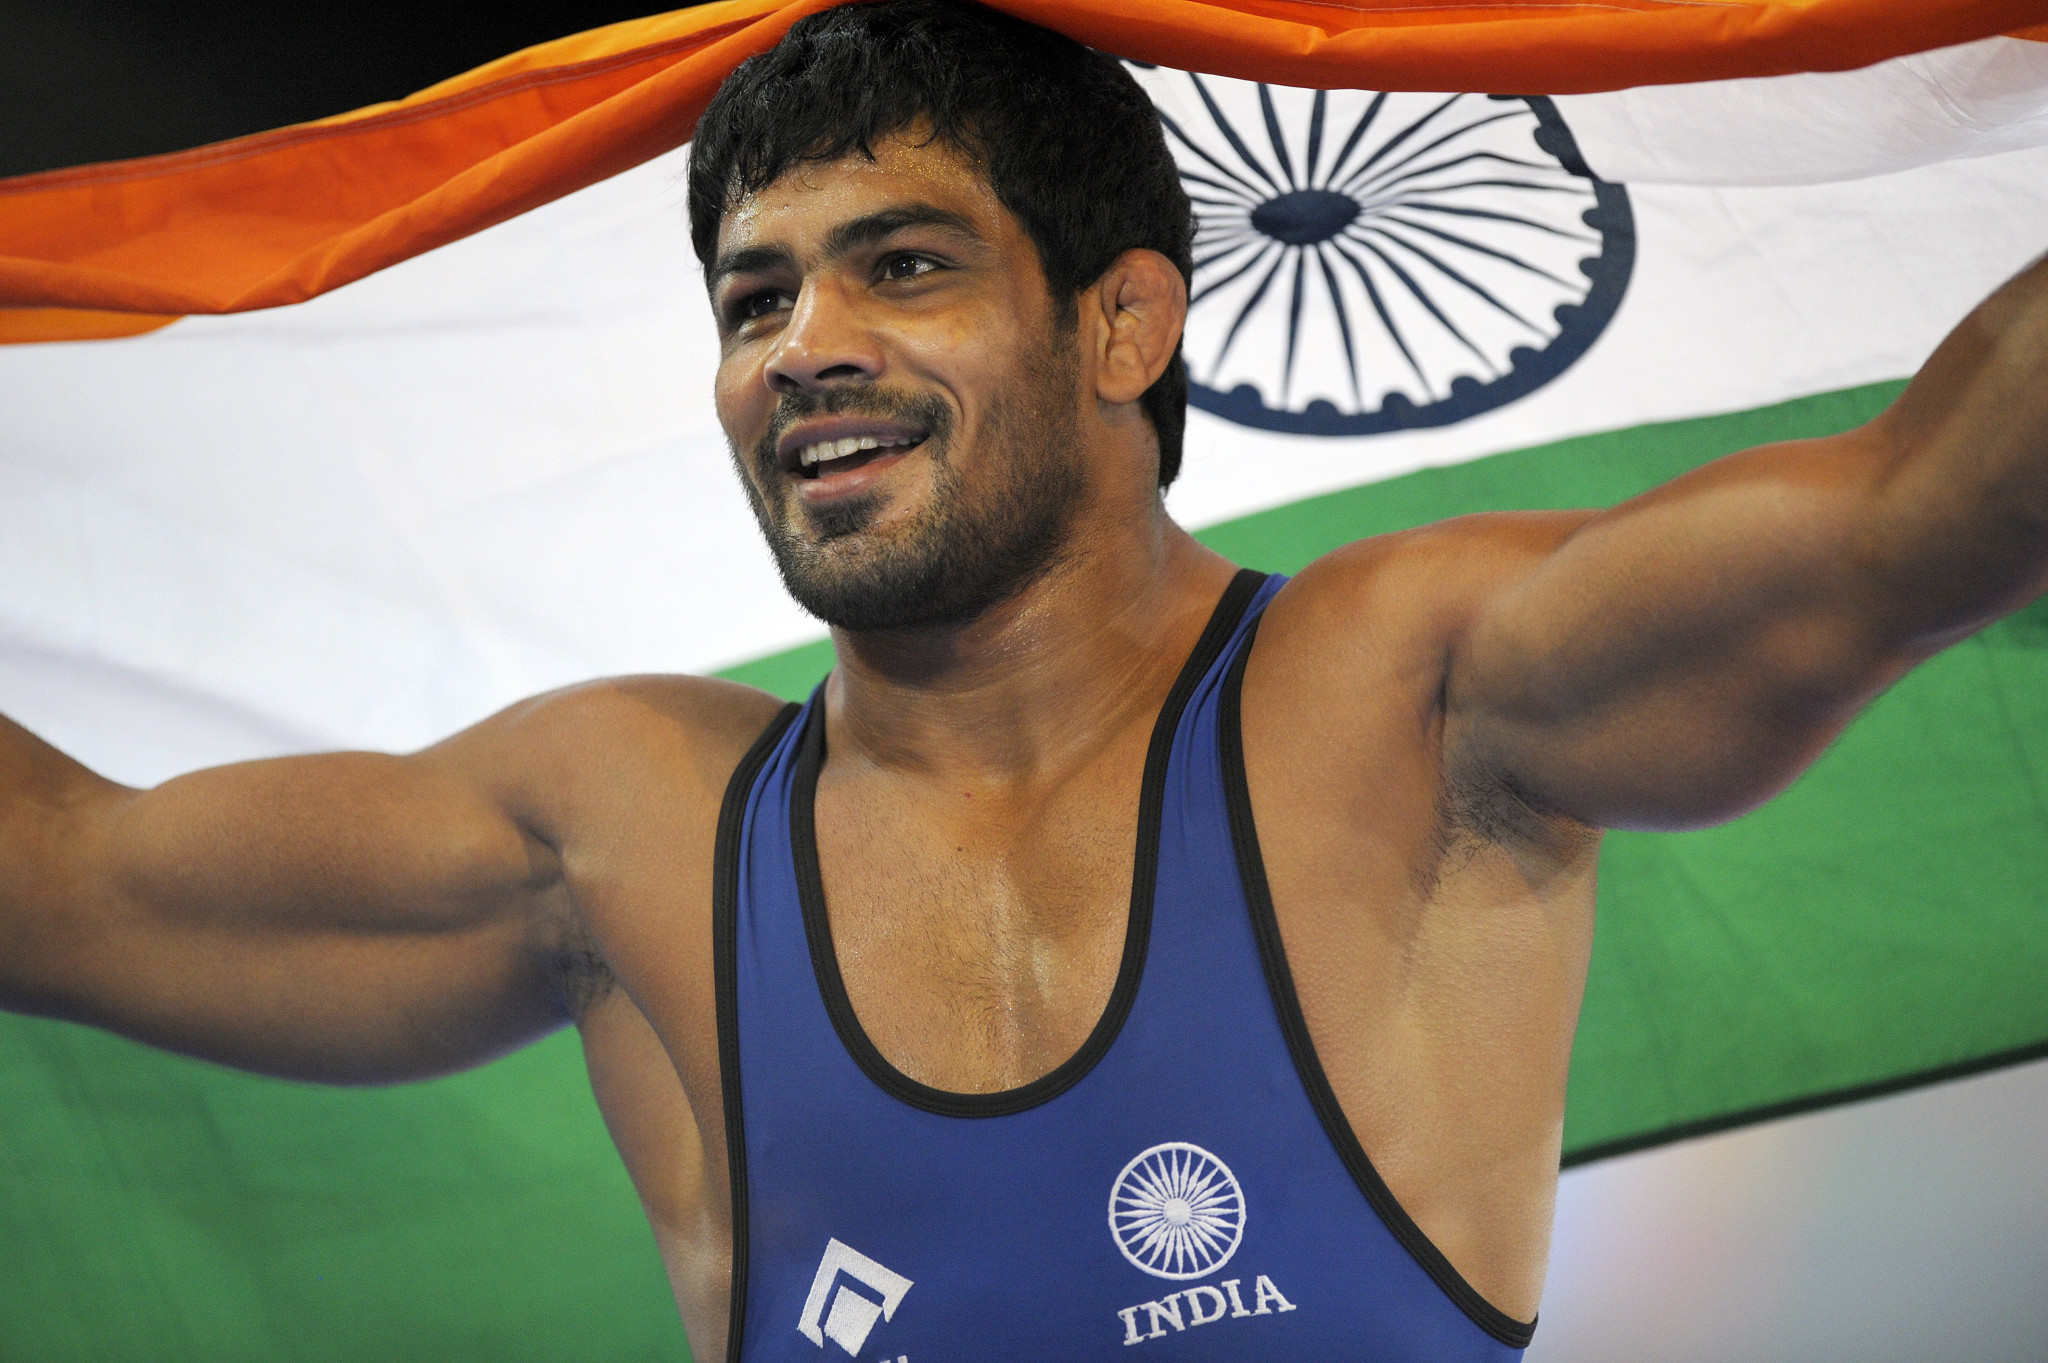 Kumar takes title at Commonwealth Wrestling Championships